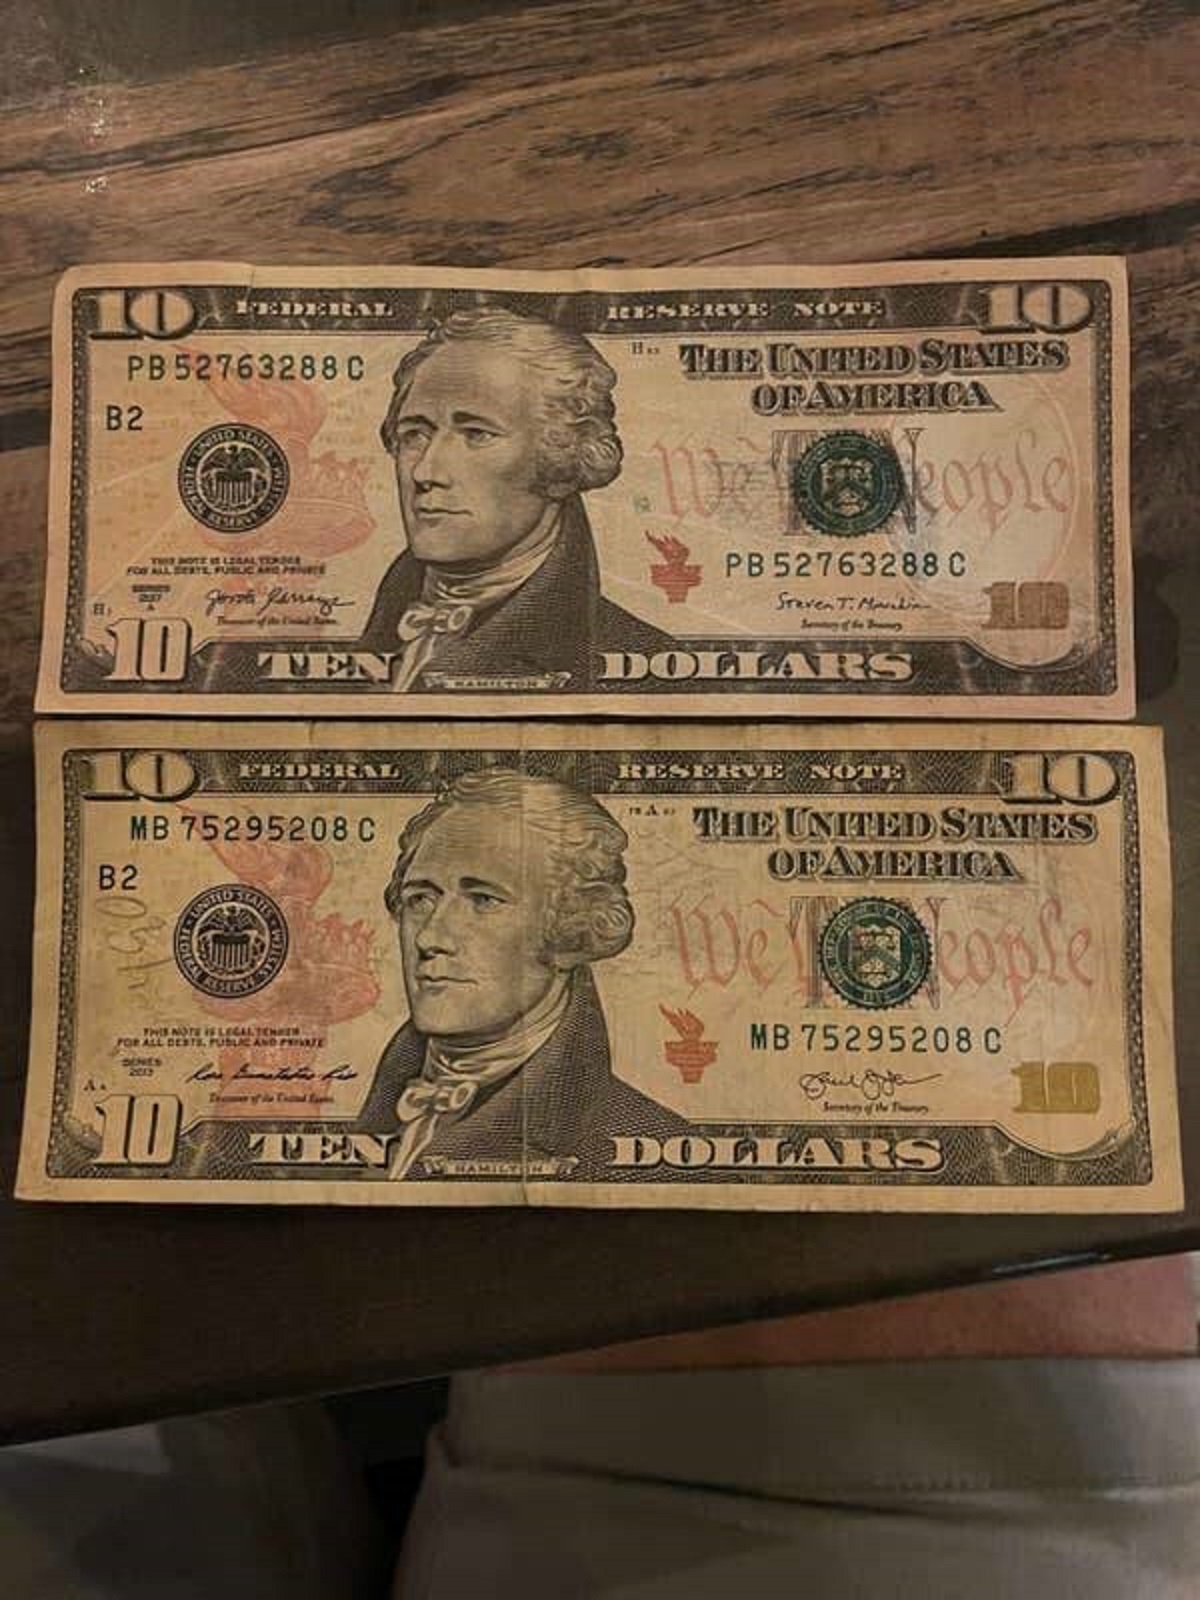 This is what a counterfeit $10 looks like compared to a real one: